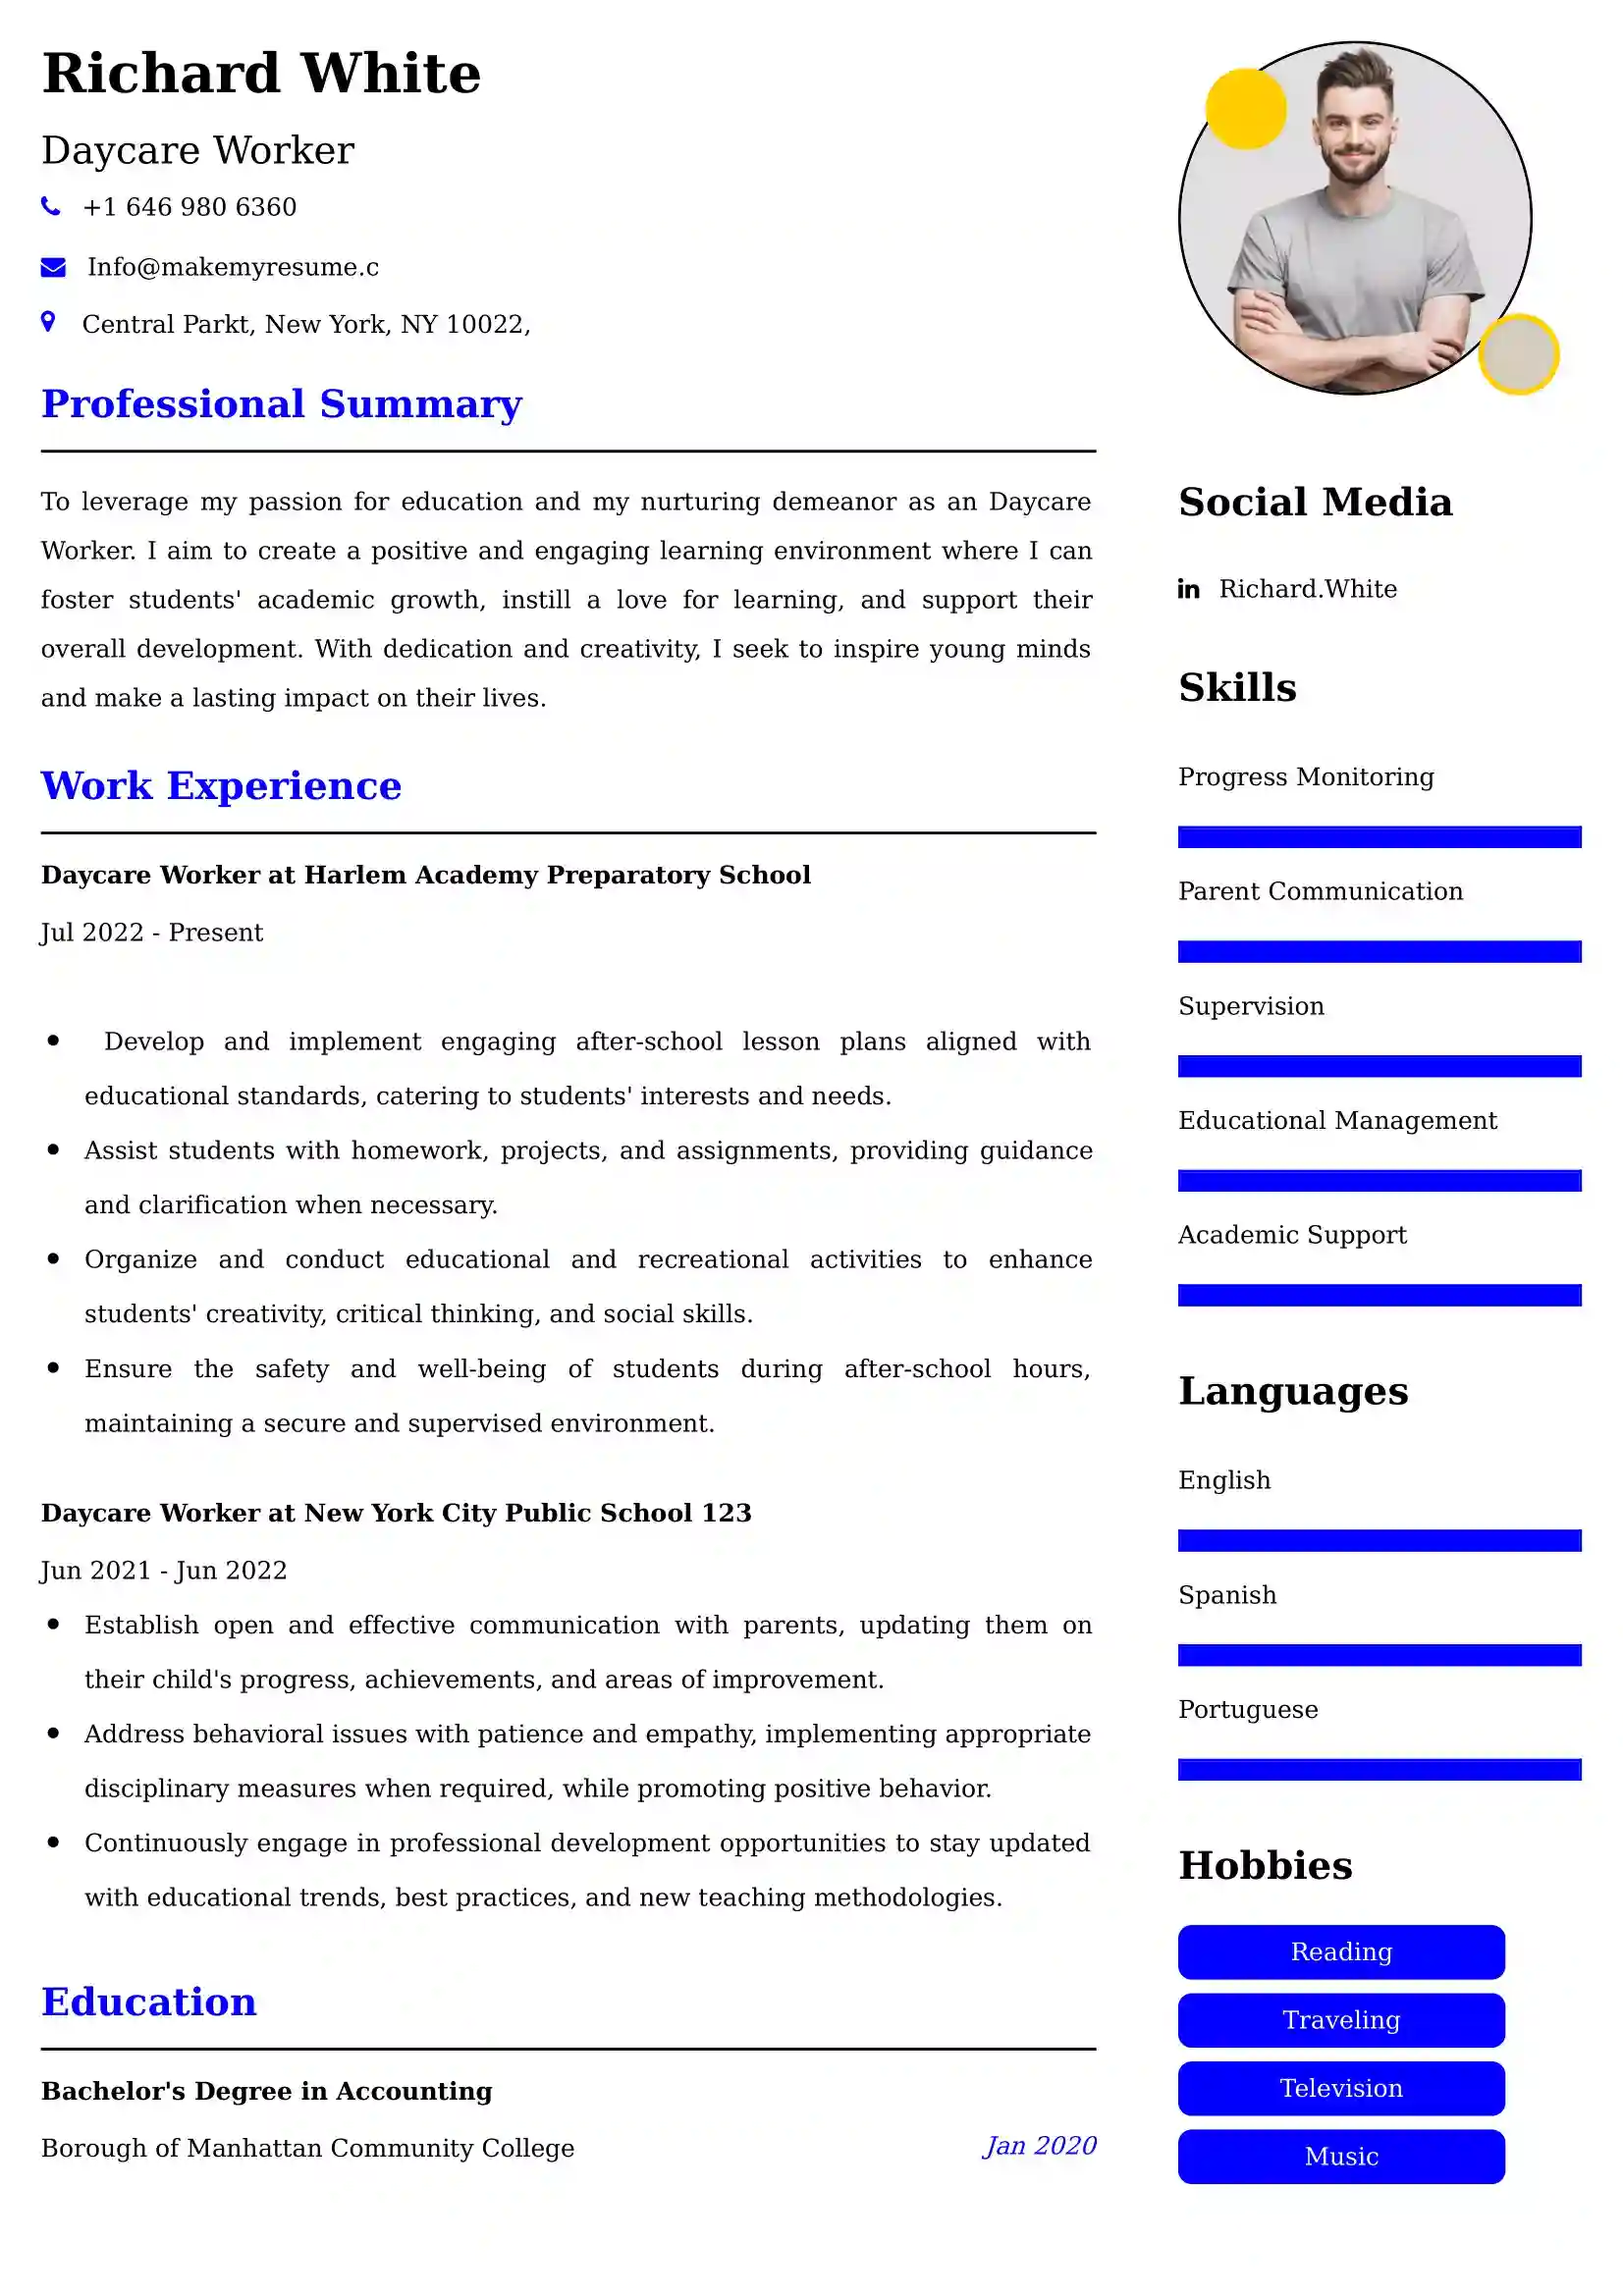 Daycare Worker CV Examples Malaysia